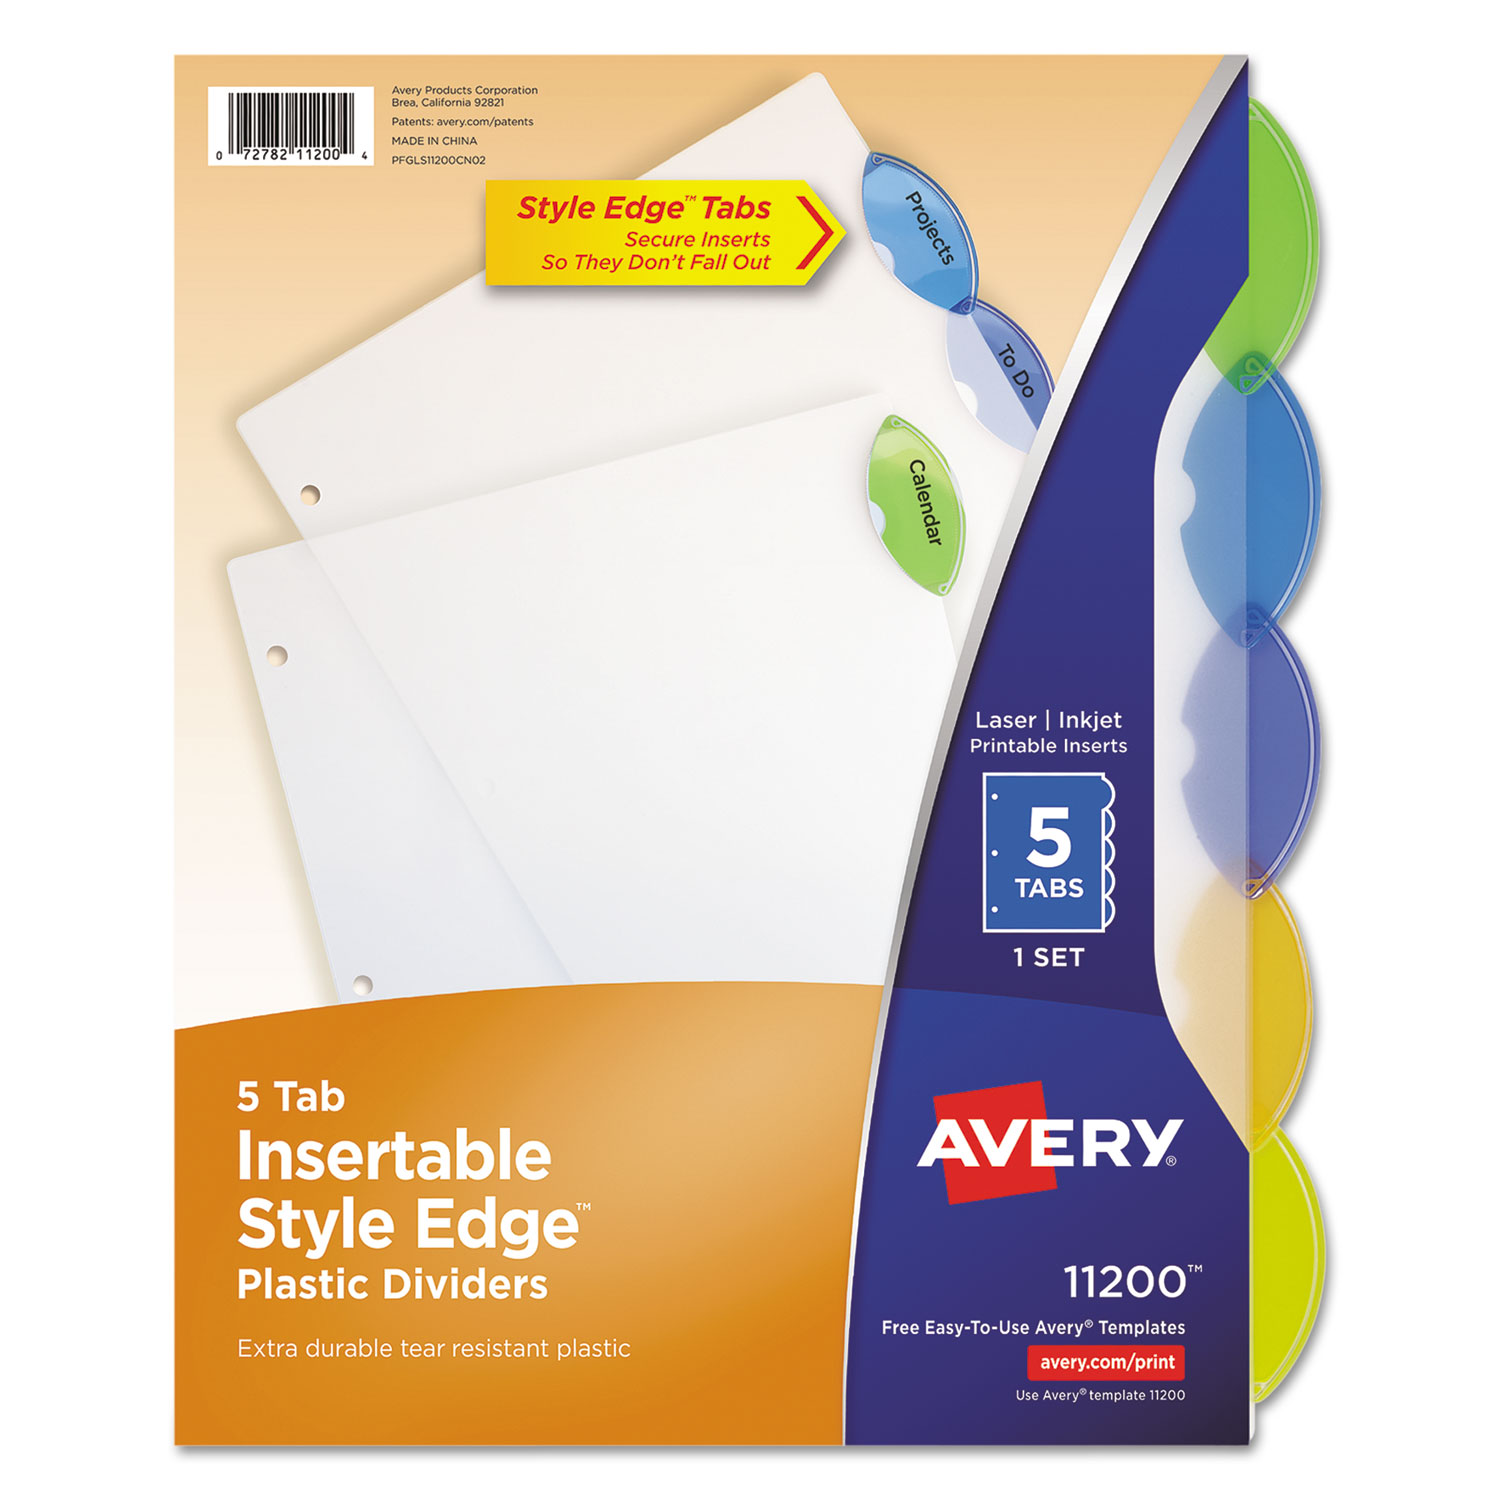 for sale online Avery Dennison Ave-11200 Style Edge Clear Plastic Insertable Divider 